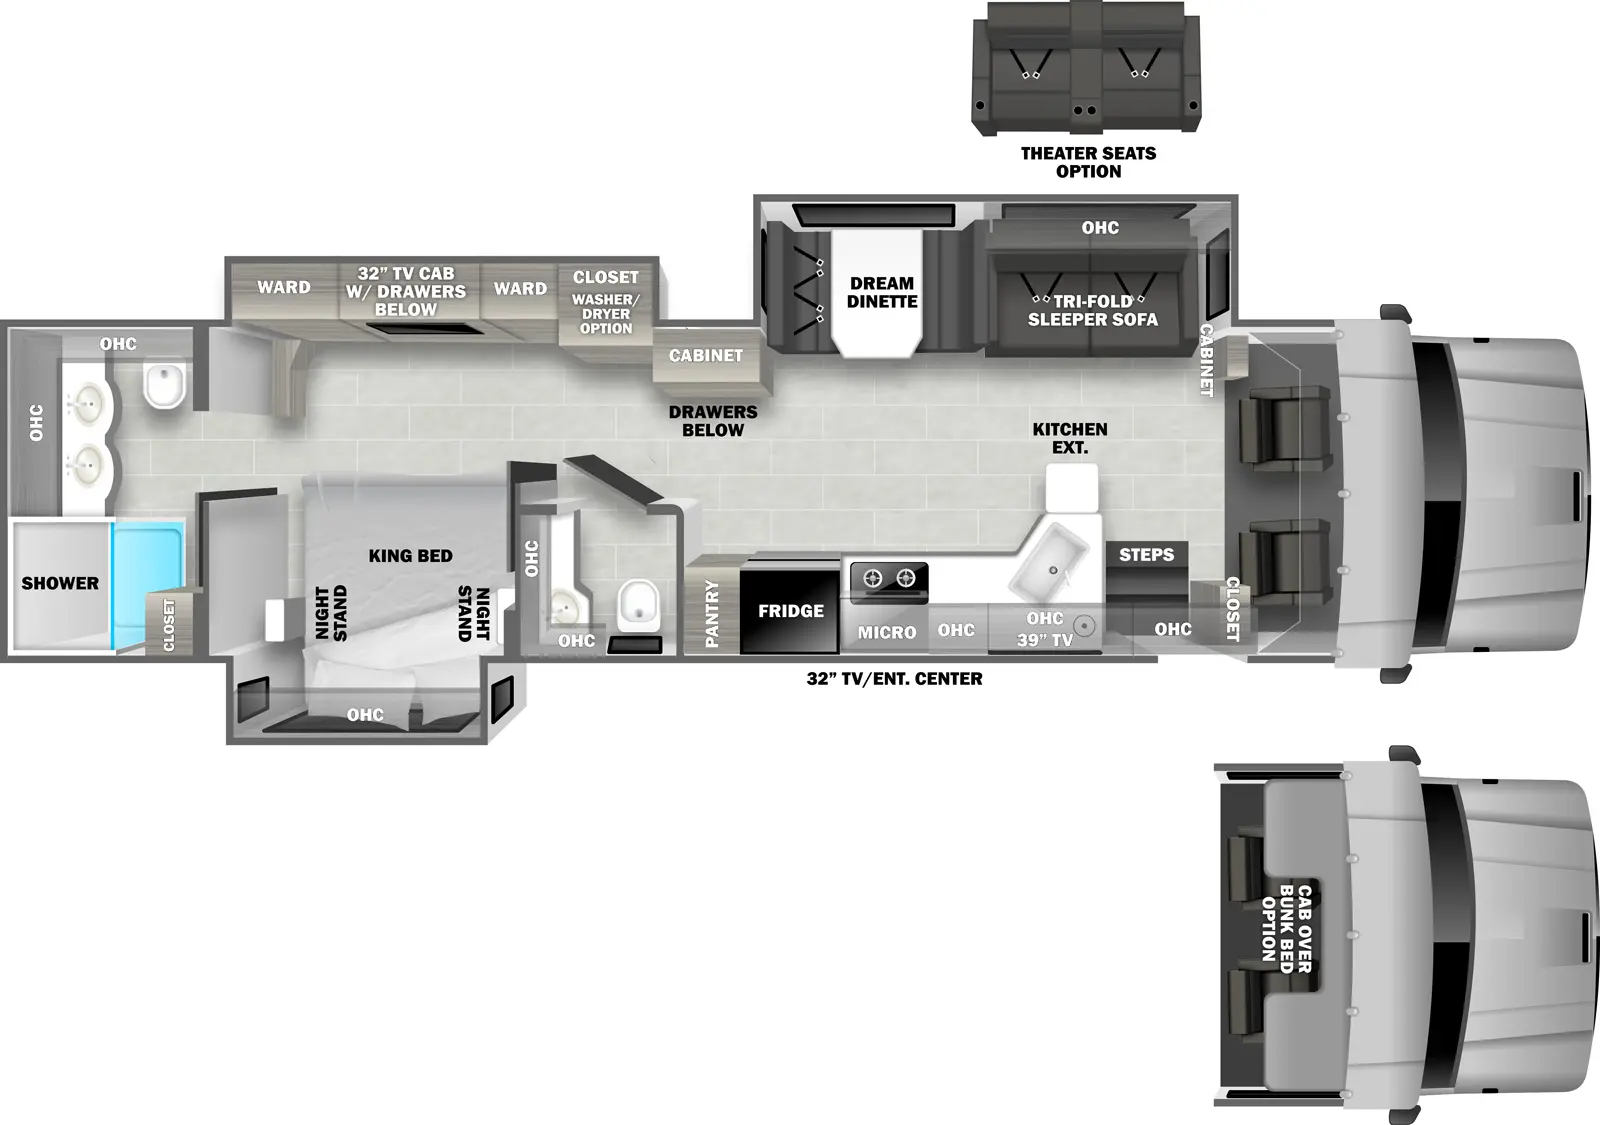 The 3700RB has three slideouts and one entry. Exterior features a TV/entertainment center. Interior layout front to back: cockpit (optional cab over bunk bed); off-door side cabinet, and slideout with tri-fold sleeper sofa (optional theater seating), overhead cabinet, and dream dinette; door side closet, entry, overhead cabinet, kitchen counter with extension, sink, TV, microwave, cooktop, refrigerator, and pantry; off-door side cabinet with drawers below, and slideout with closet with washer/dryer option, and wardrobes with TV and drawers below; door side full bathroom with overhead cabinet; door side king bed slideout with overhead cabinet and night stands on each side; rear full bathroom with dual sinks, closet, and overhead cabinets.